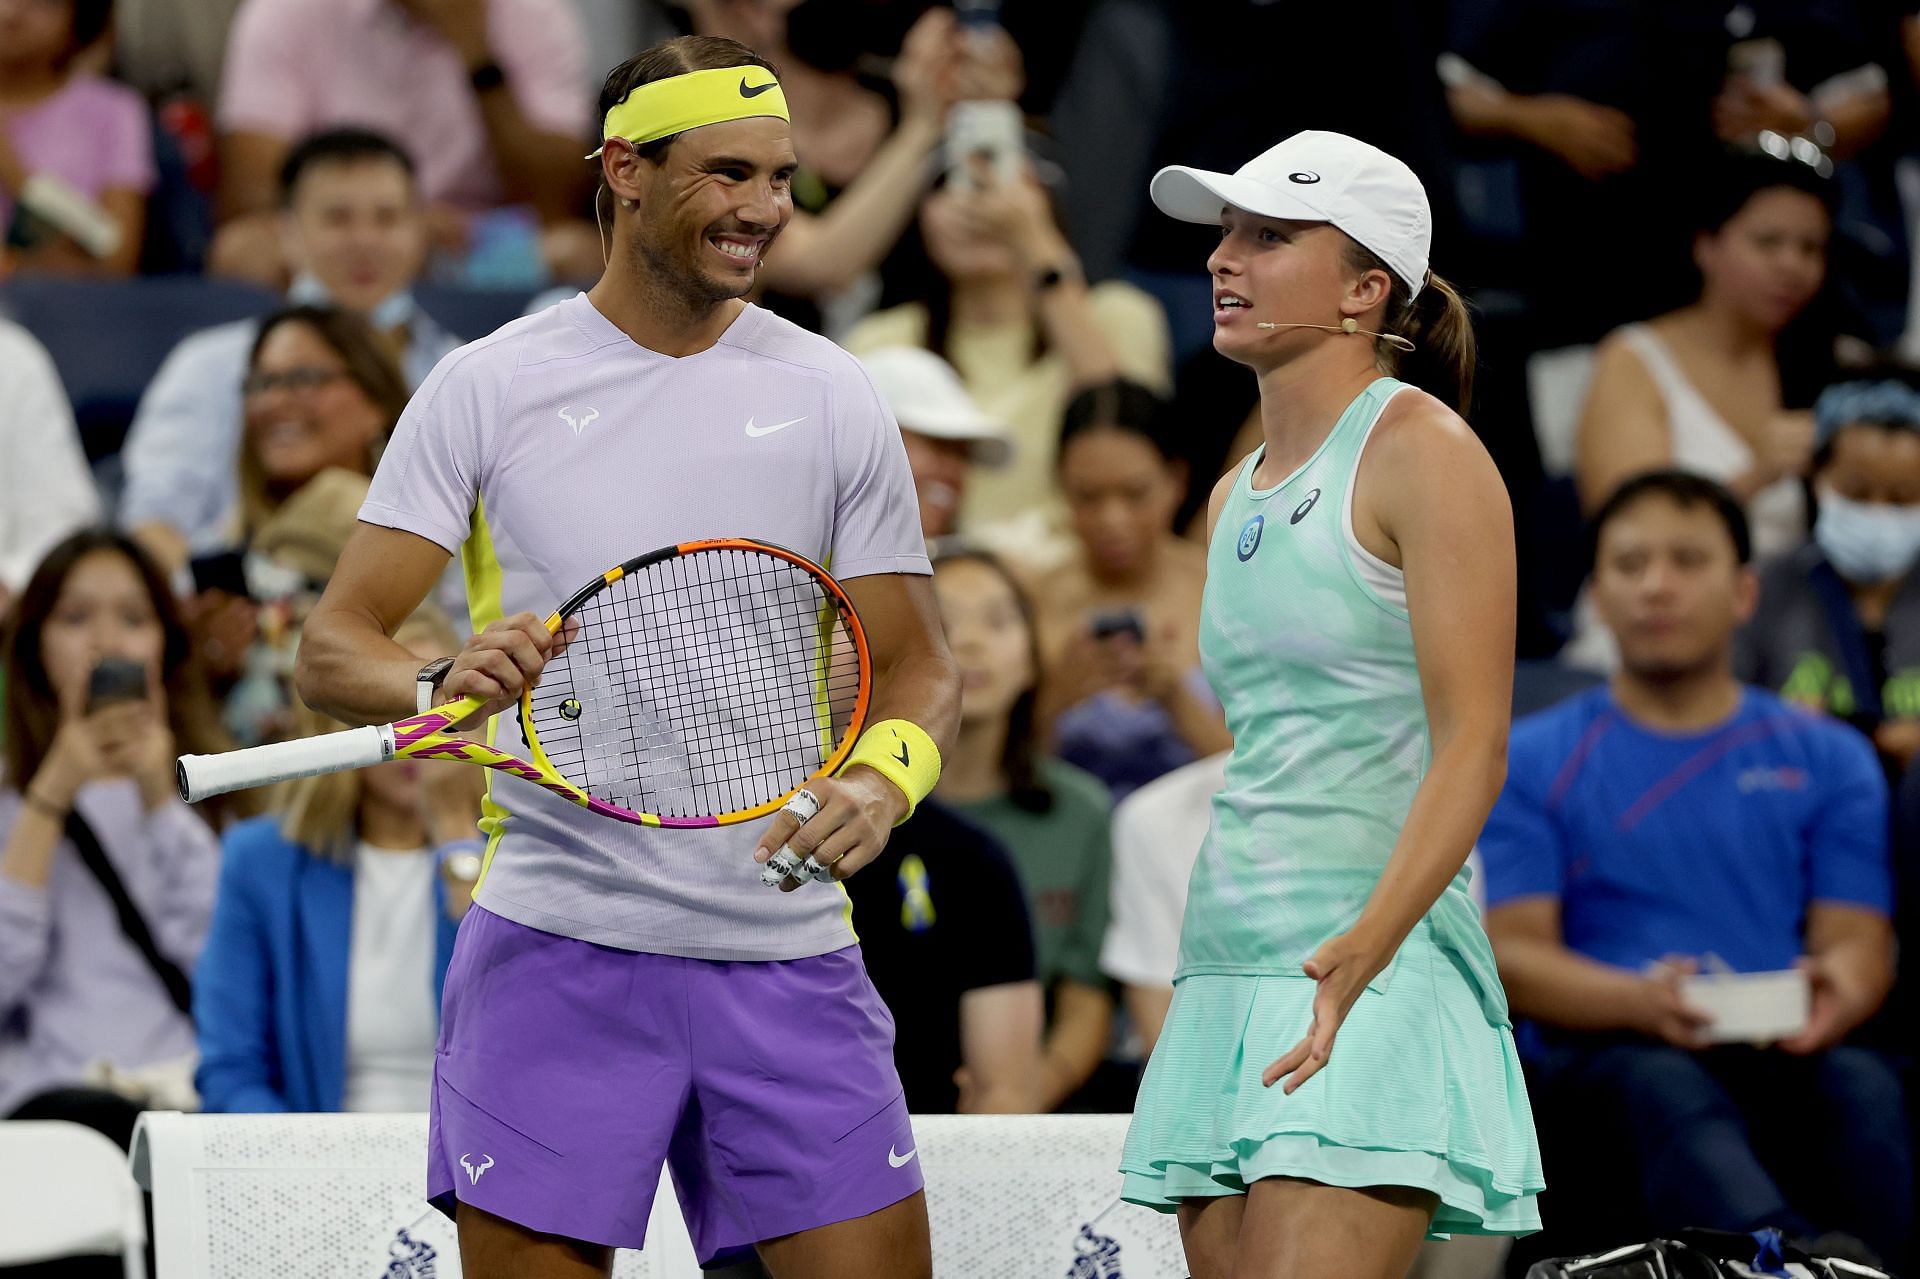 Rafael Nadal and Iga Swiatek at the Tennis Plays For Peace exhibition match at the US Open.